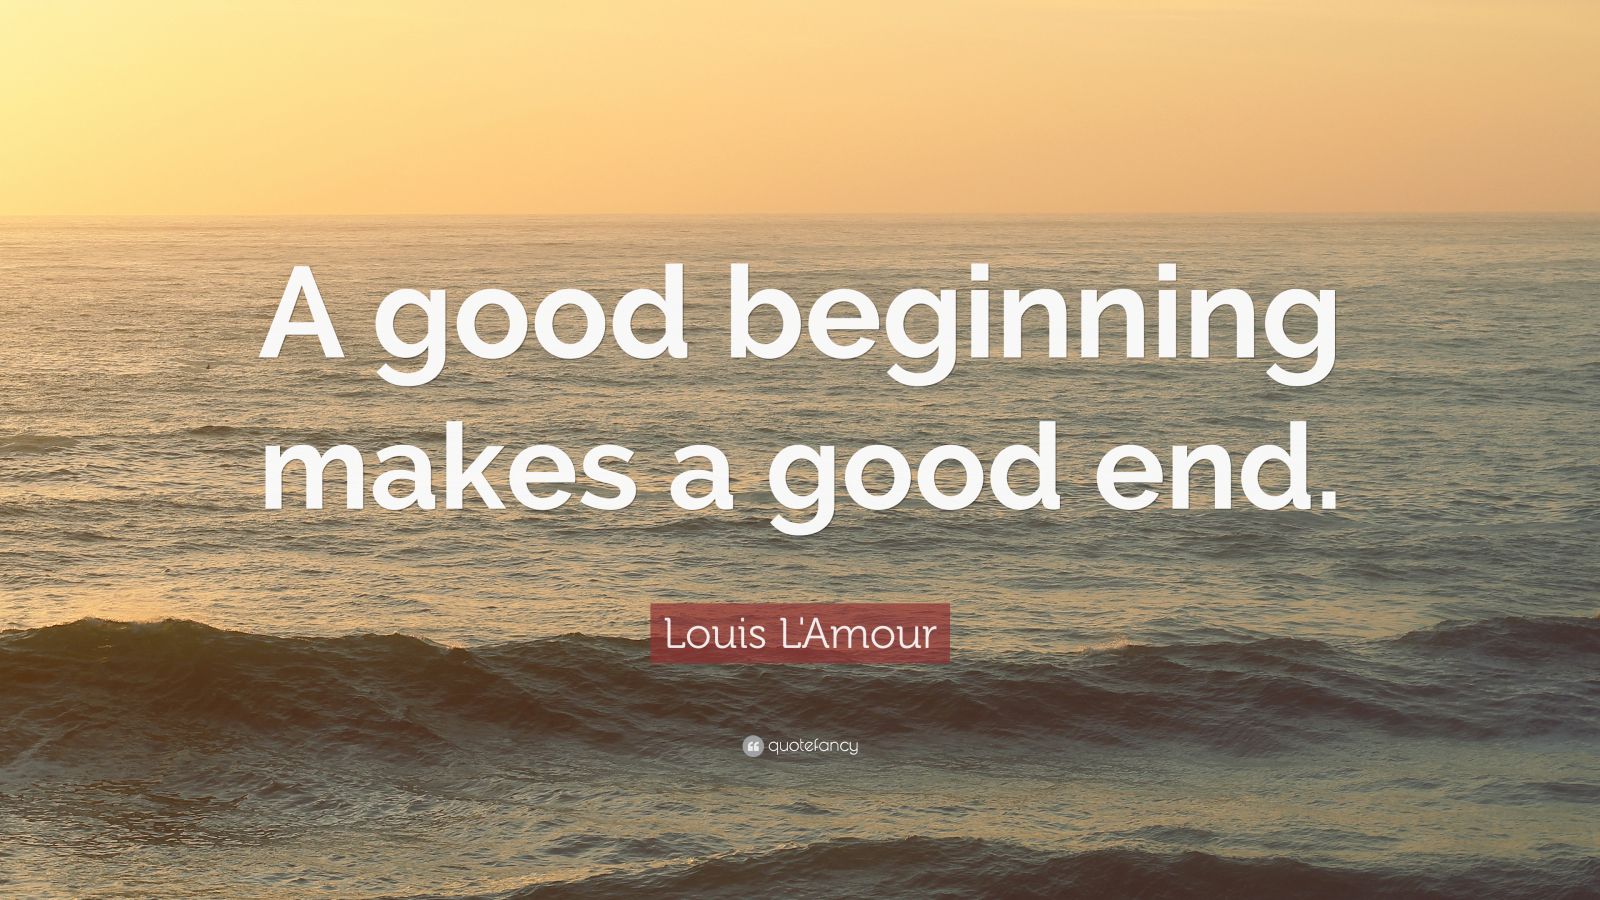 Louis L'Amour Quote “A good beginning makes a good end.” (12